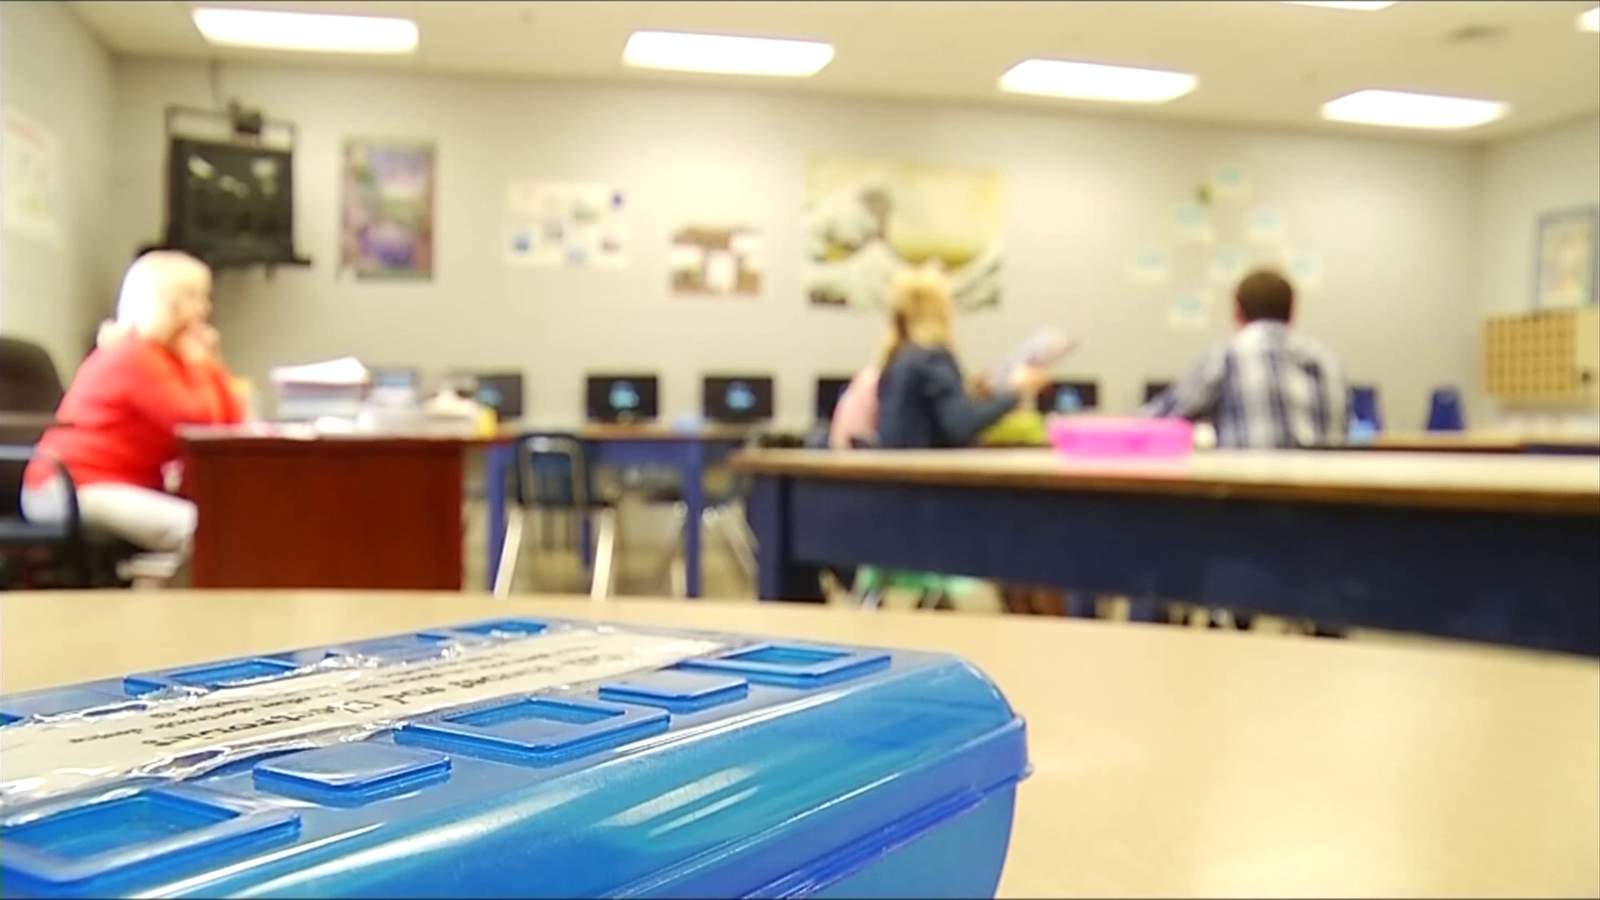 'We are drowning’: Hundreds sign petition asking Roanoke County schools to reconsider hybrid learning